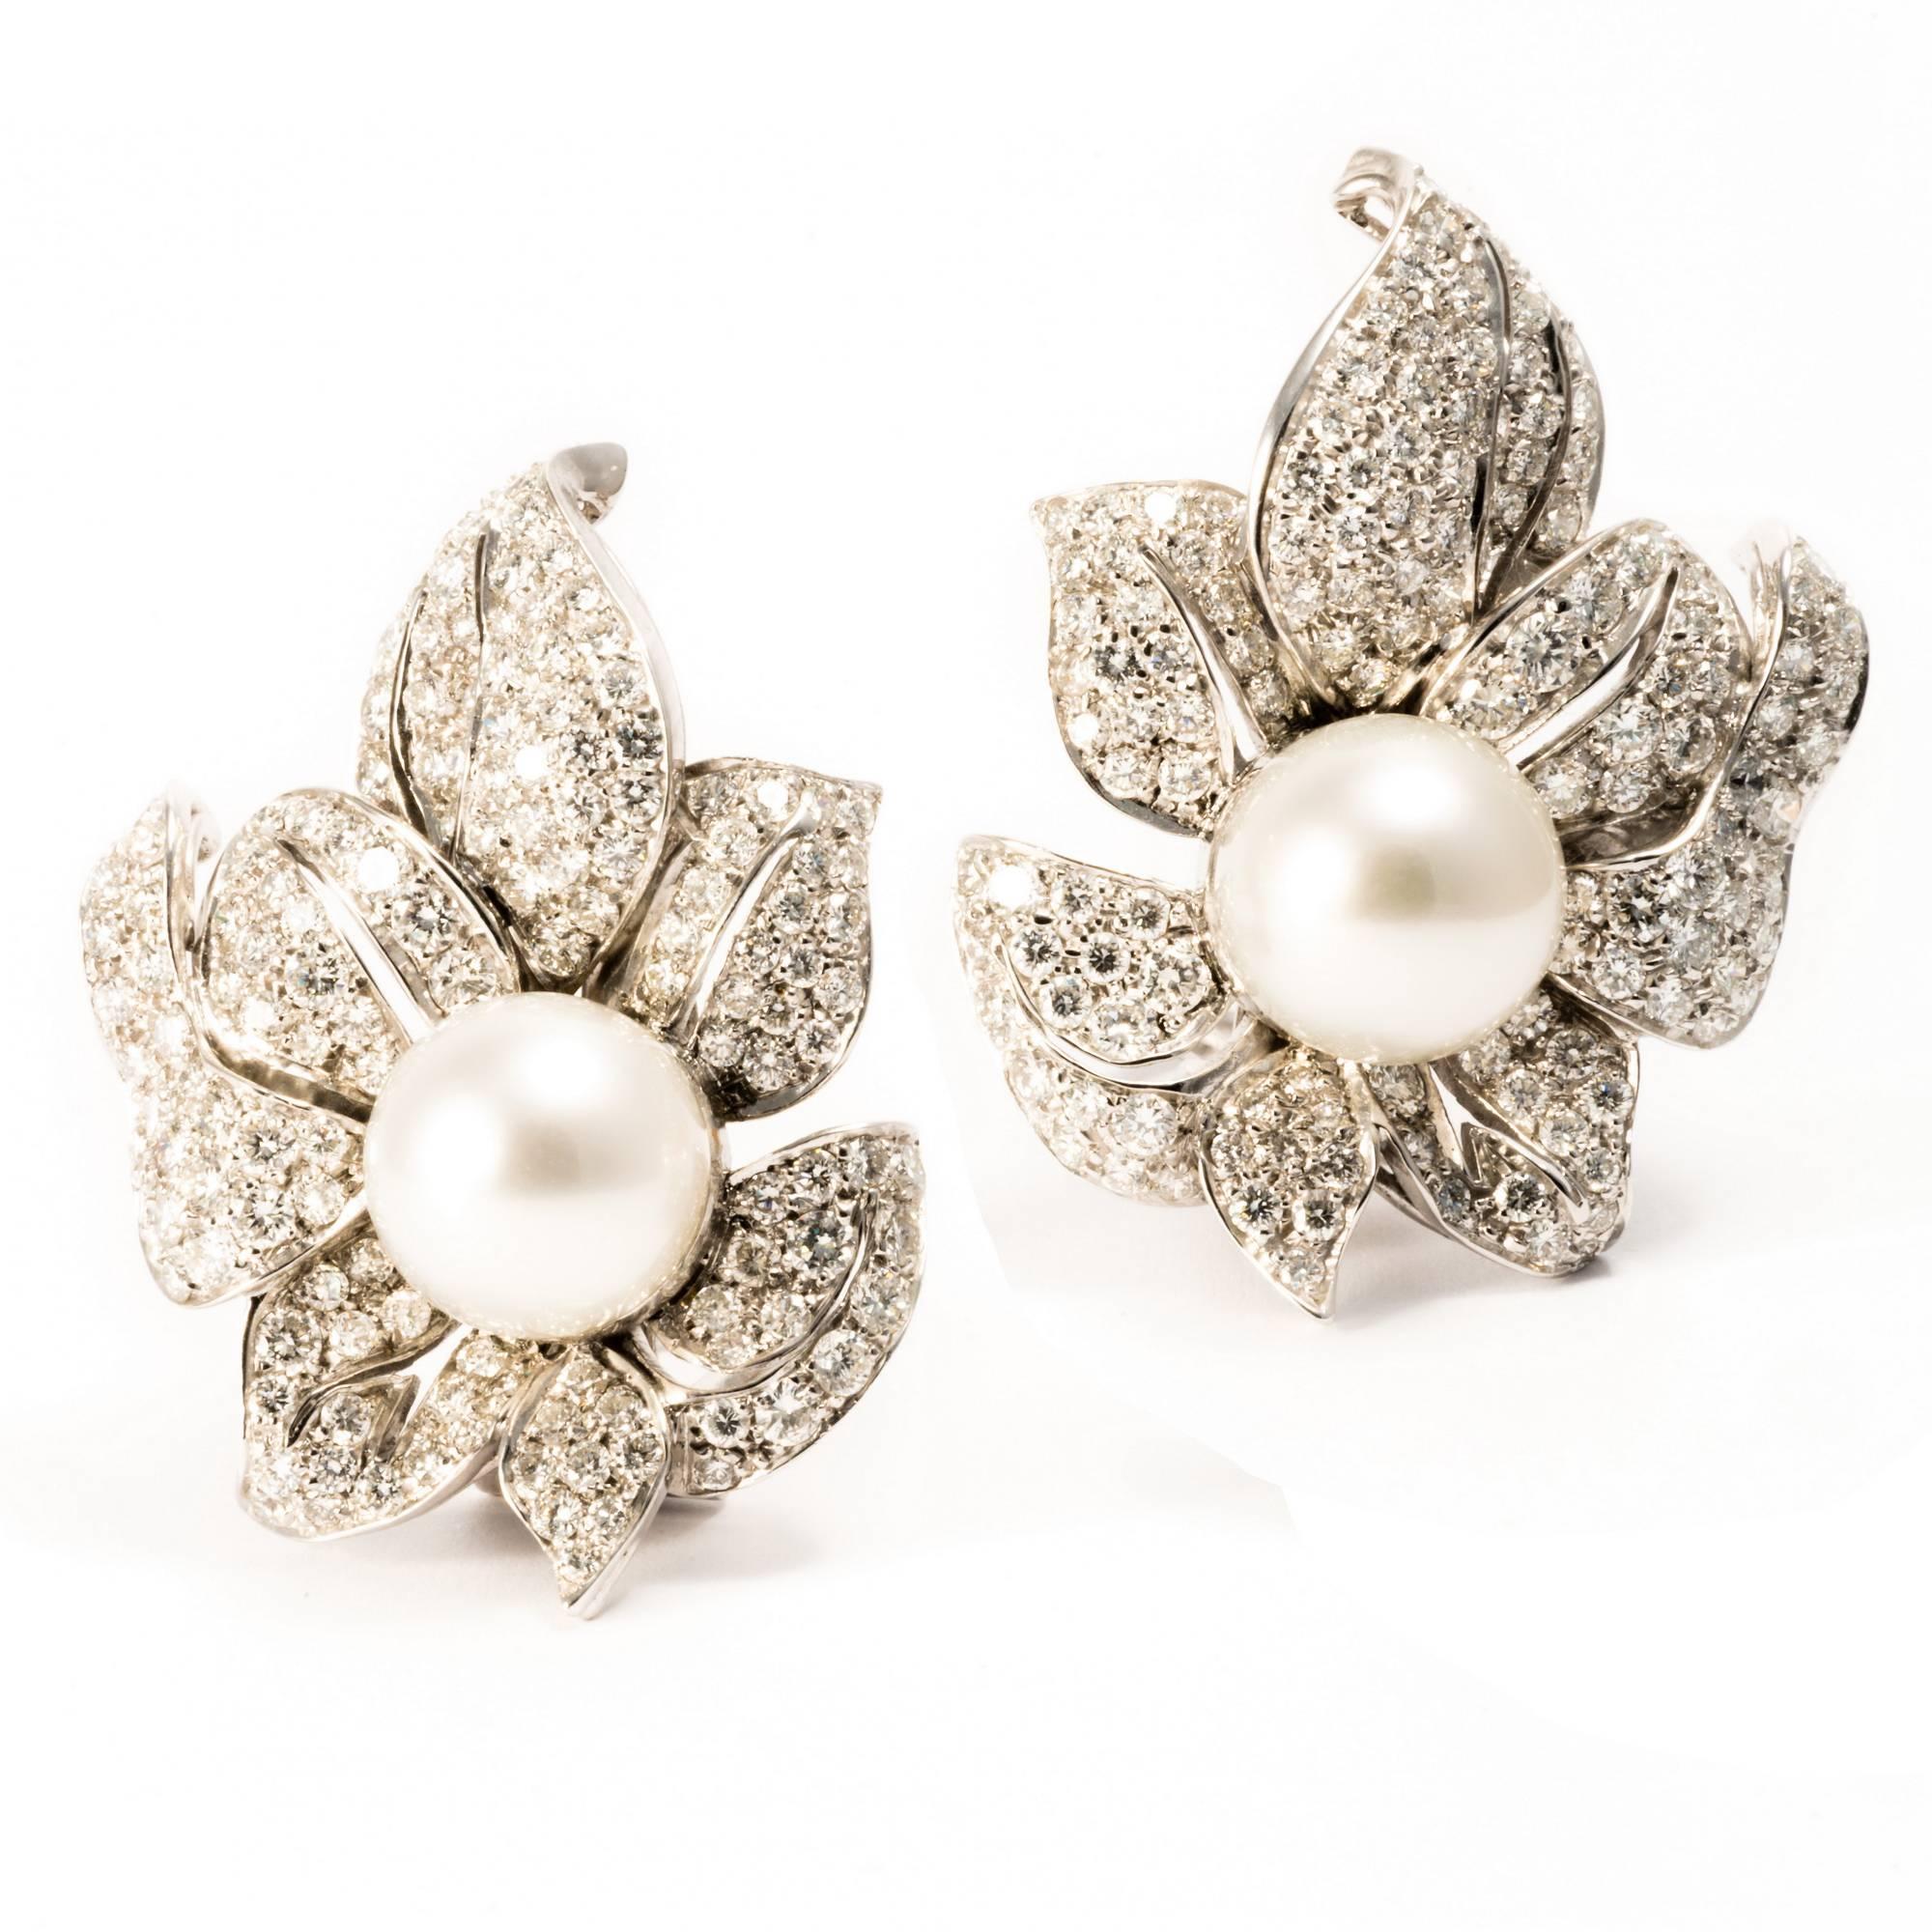 Ansuini Diamonds and Pearls 18K White Gold Orchid Earrings For Sale 2